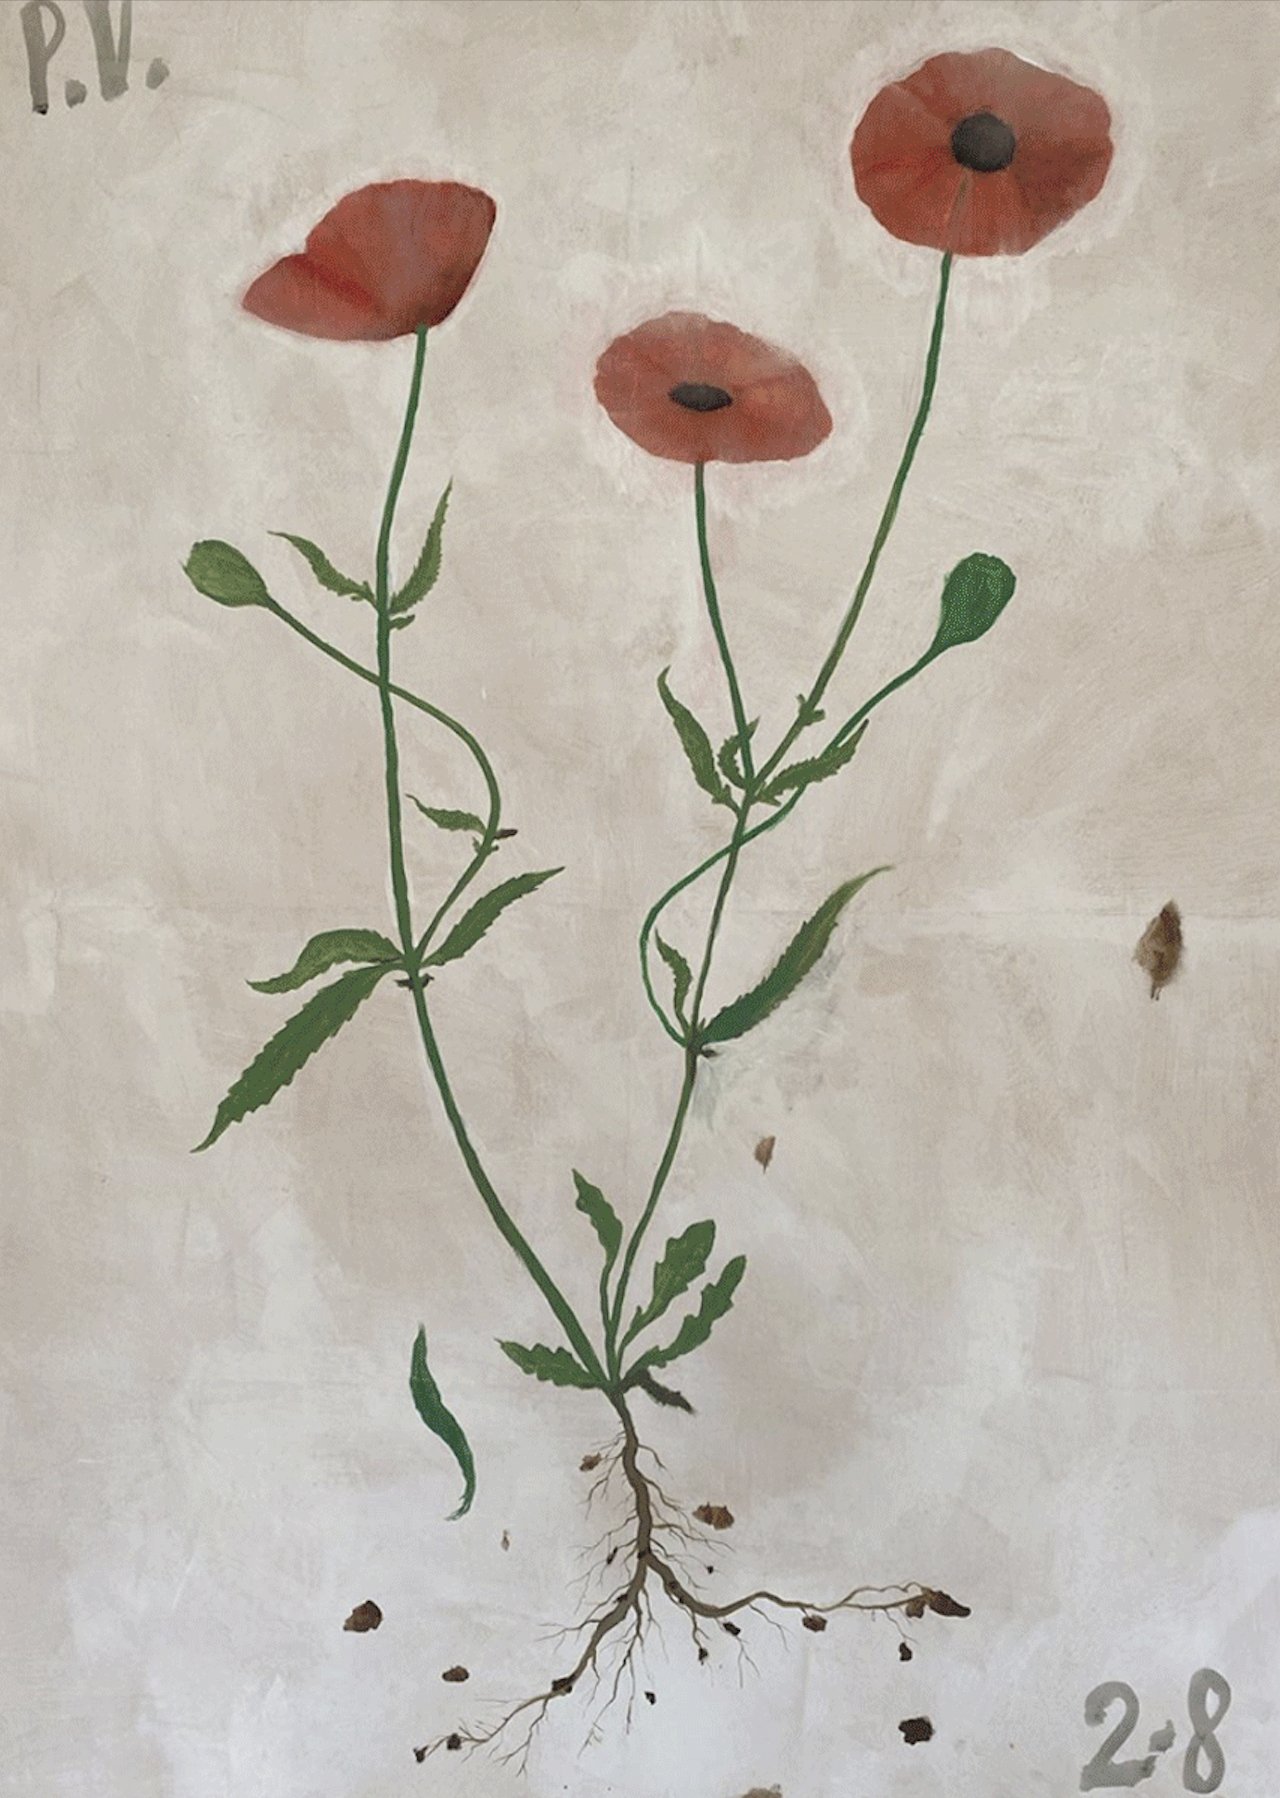 Quarantine Diary (Red Poppies, August 2nd), 2020